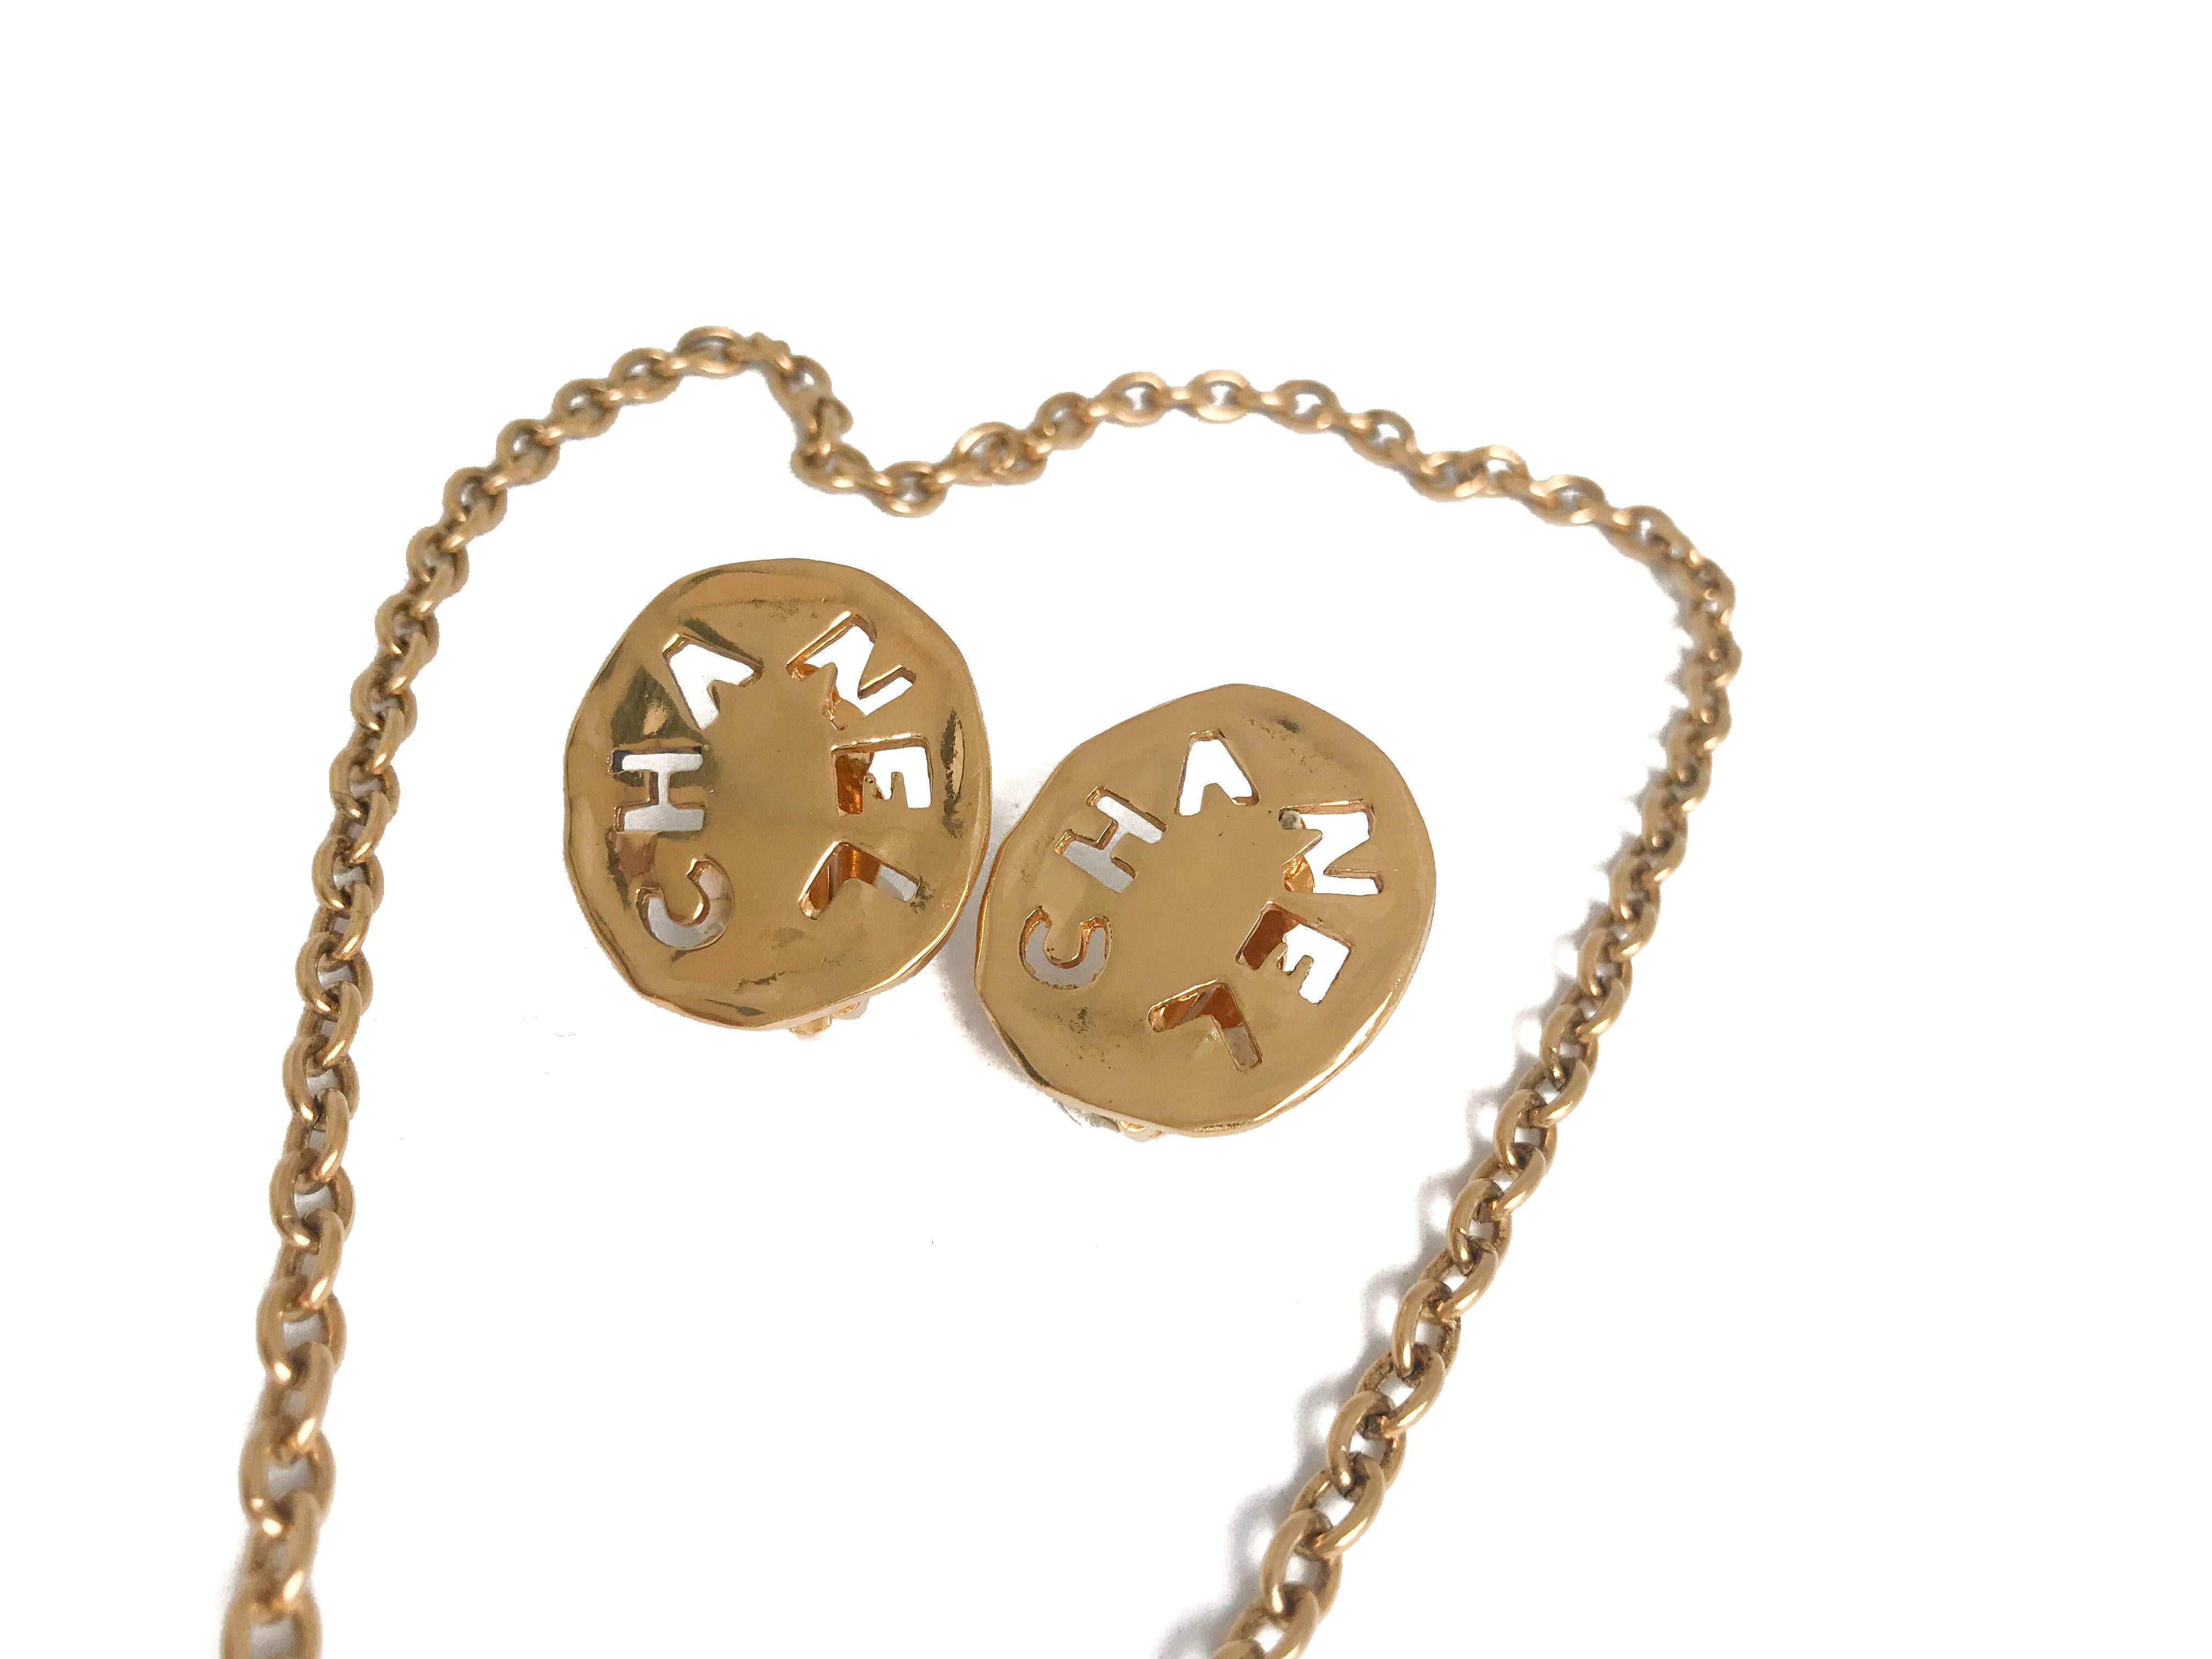 Contemporary Chanel 1980s Vintage 18 Karat Gold Plated Logo Necklace and Clip On Earrings Set